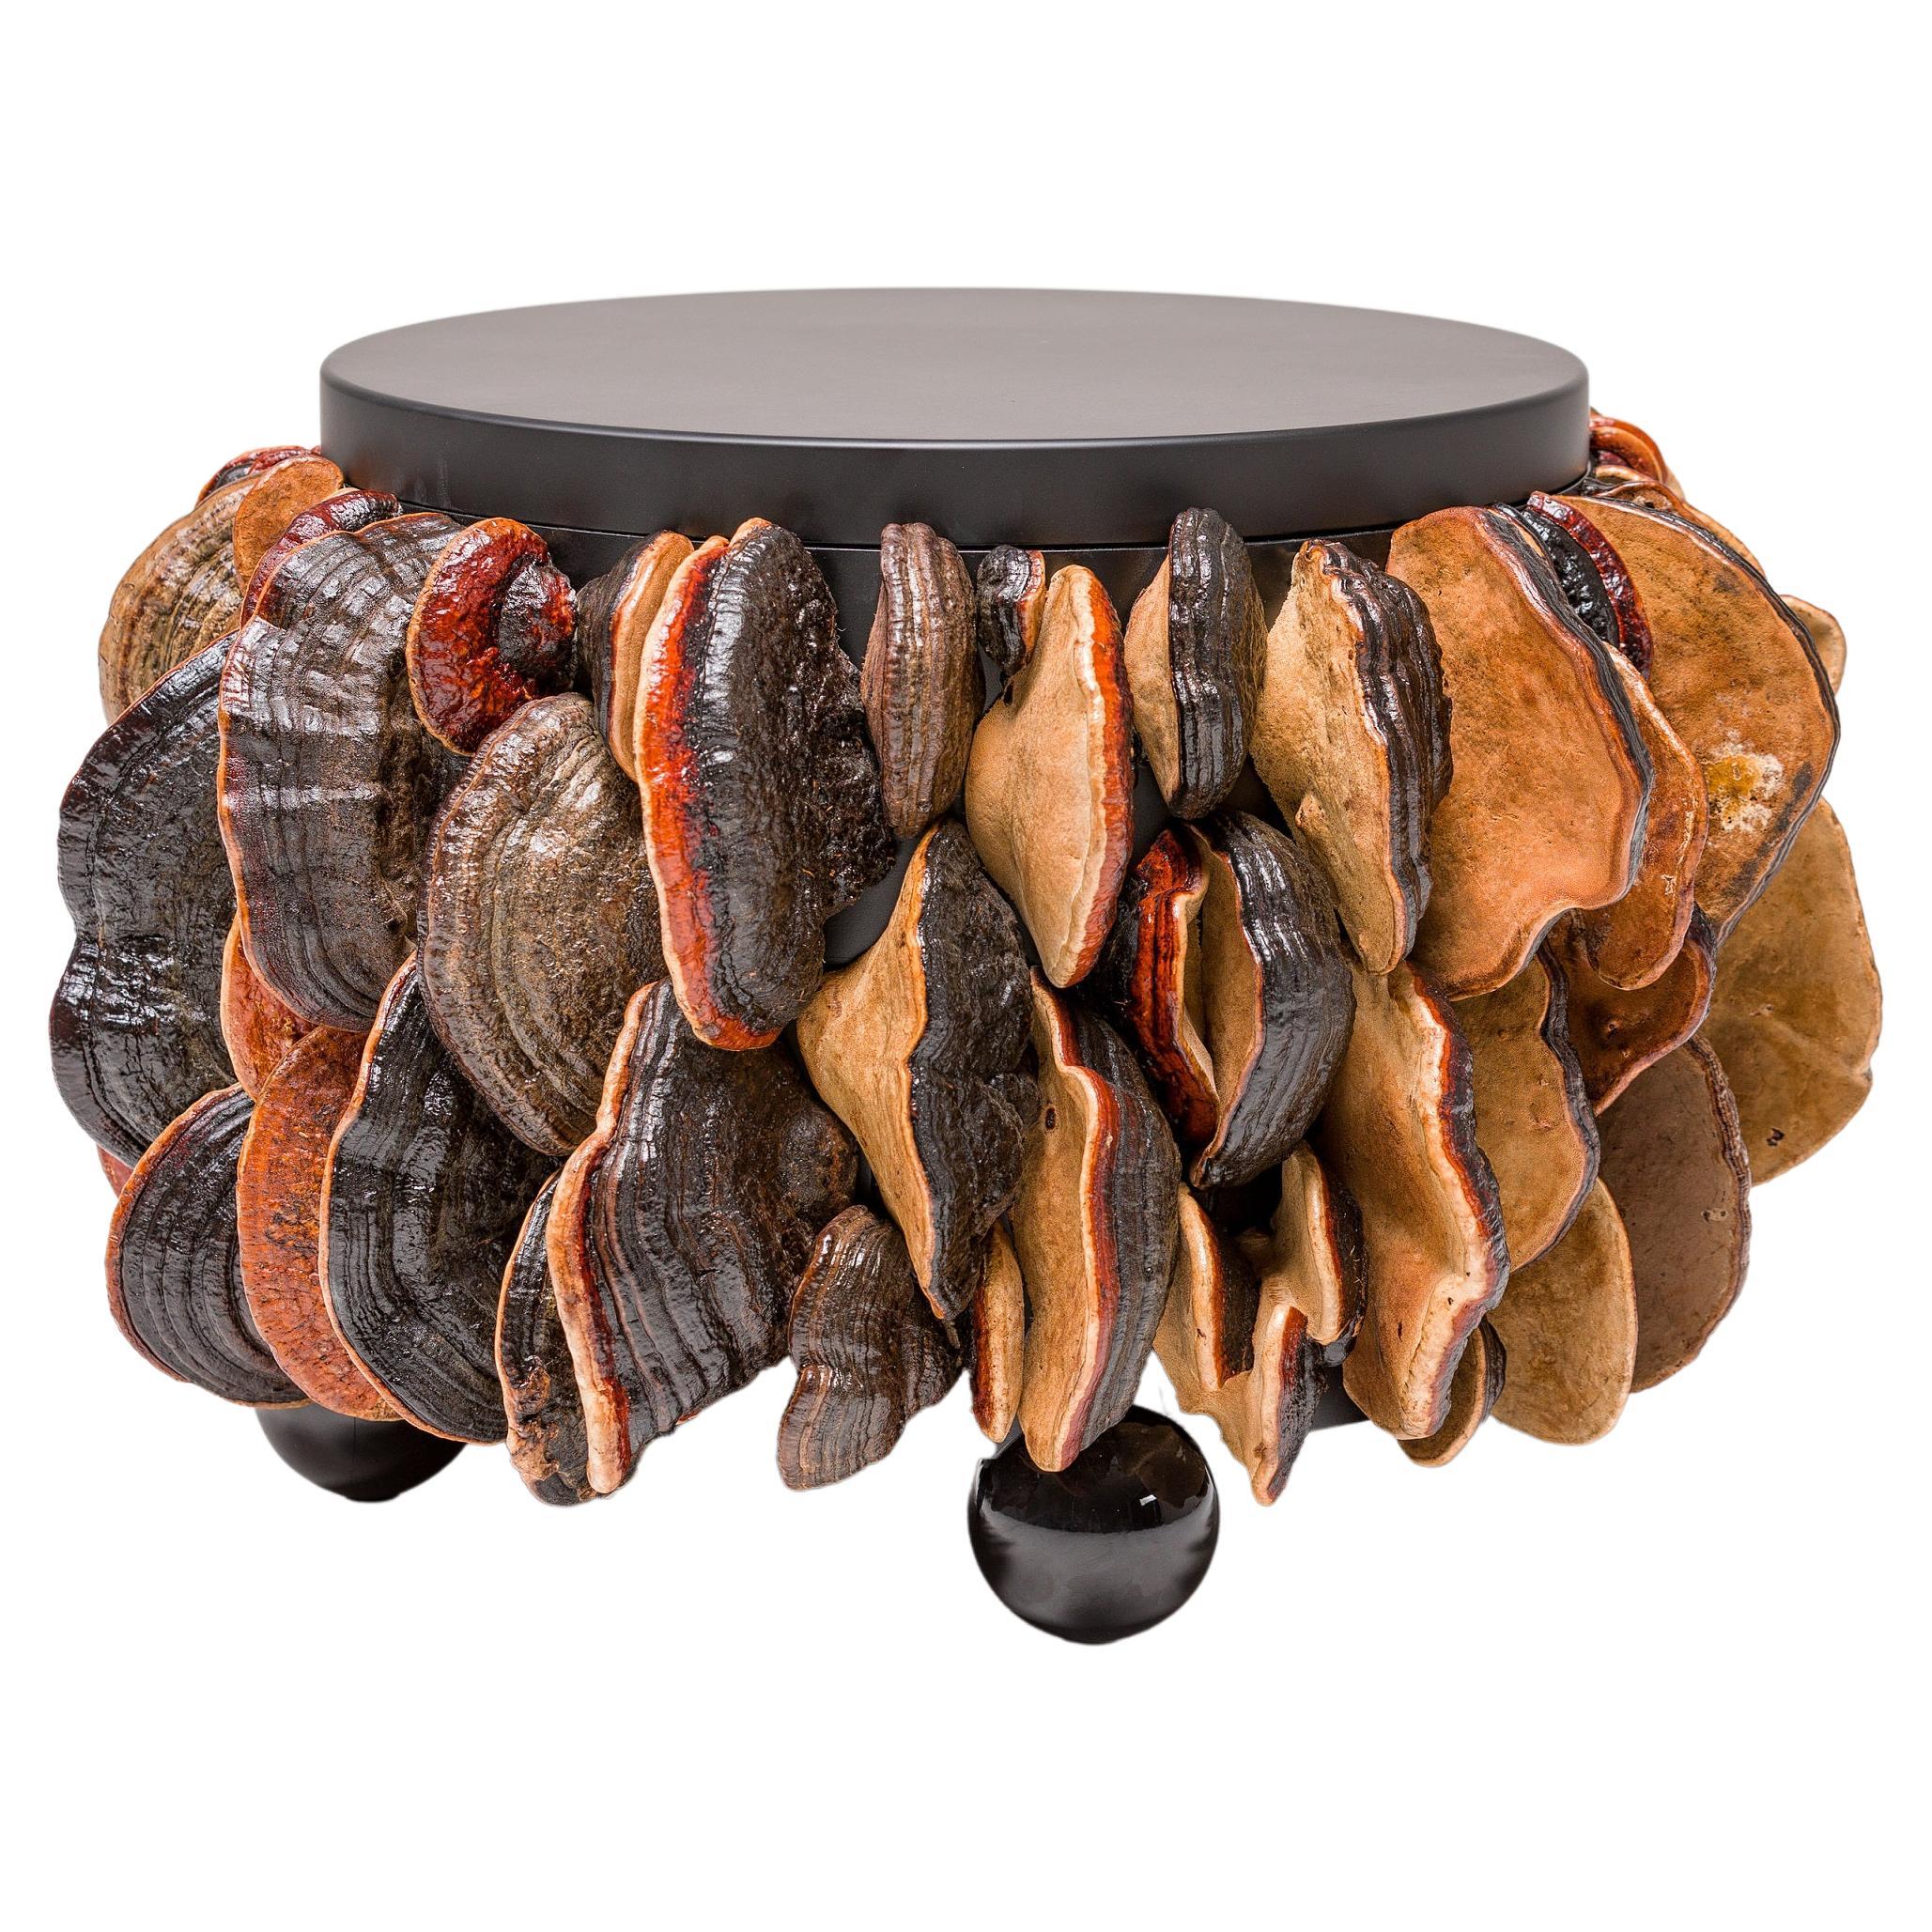 Extravagant Highend Terracotta-Brown Center Table, Collection Mushrooms